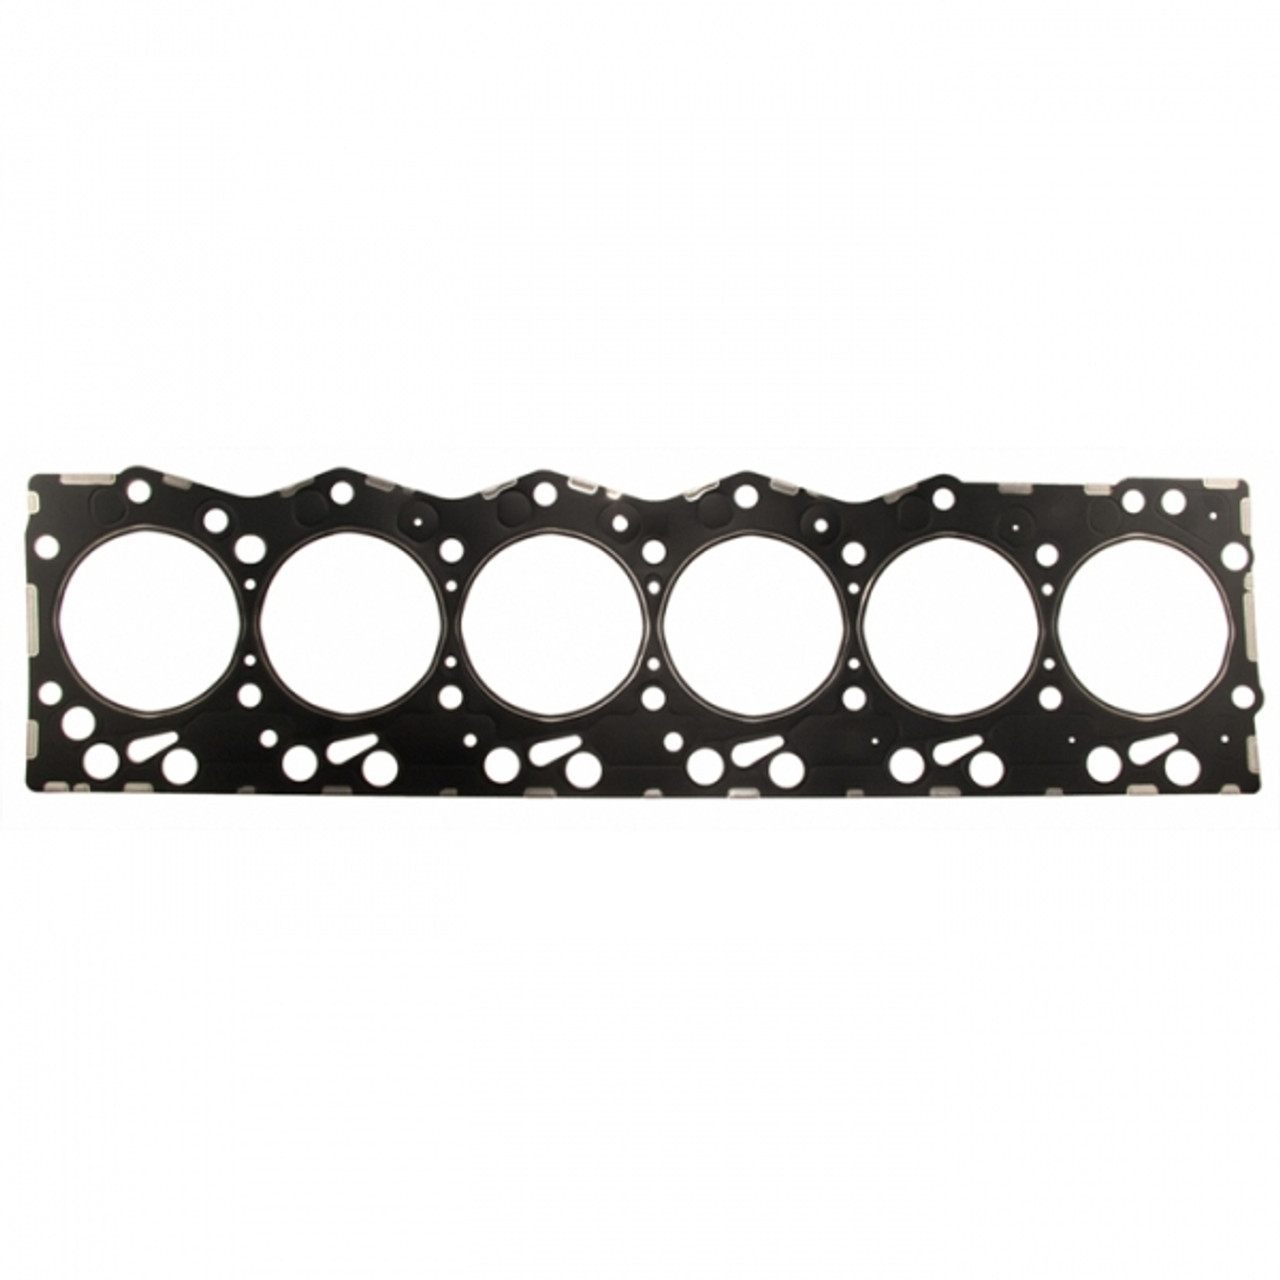 Mahle Cylinder Head Gasket 2003 to 2007 5.9L Cummins (1.10MM) (MCI54556)-Main View